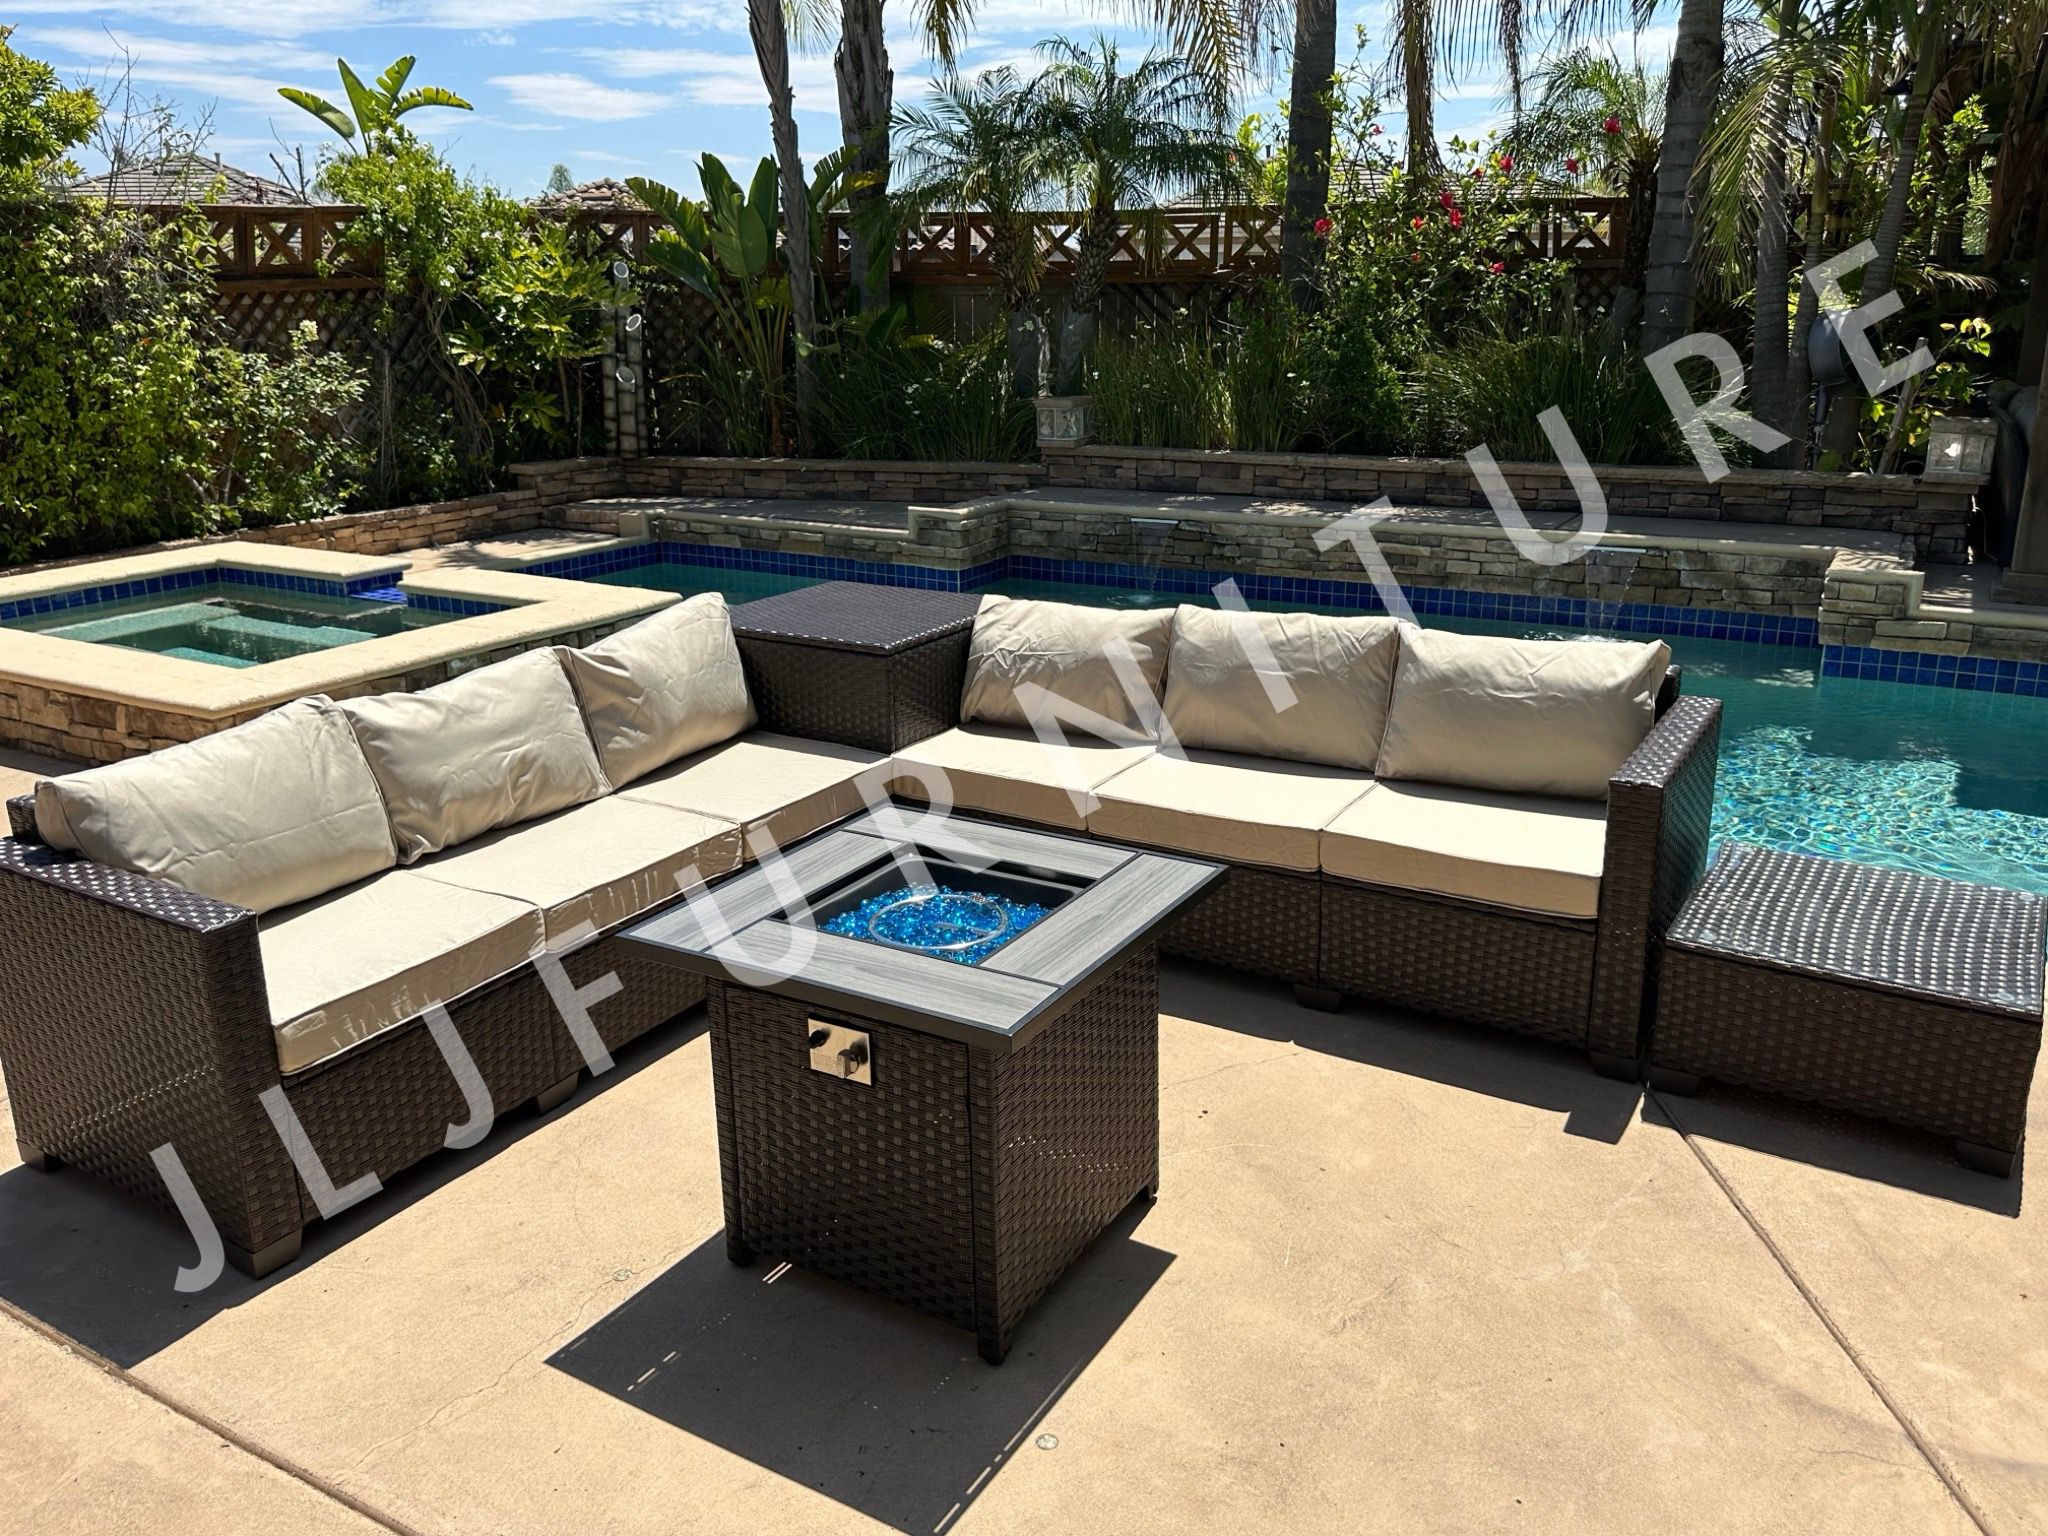 NEW🔥Outdoor Patio Furniture Set Brown Wicker Beige Cushions with 30" Firepit ASSEMBLED